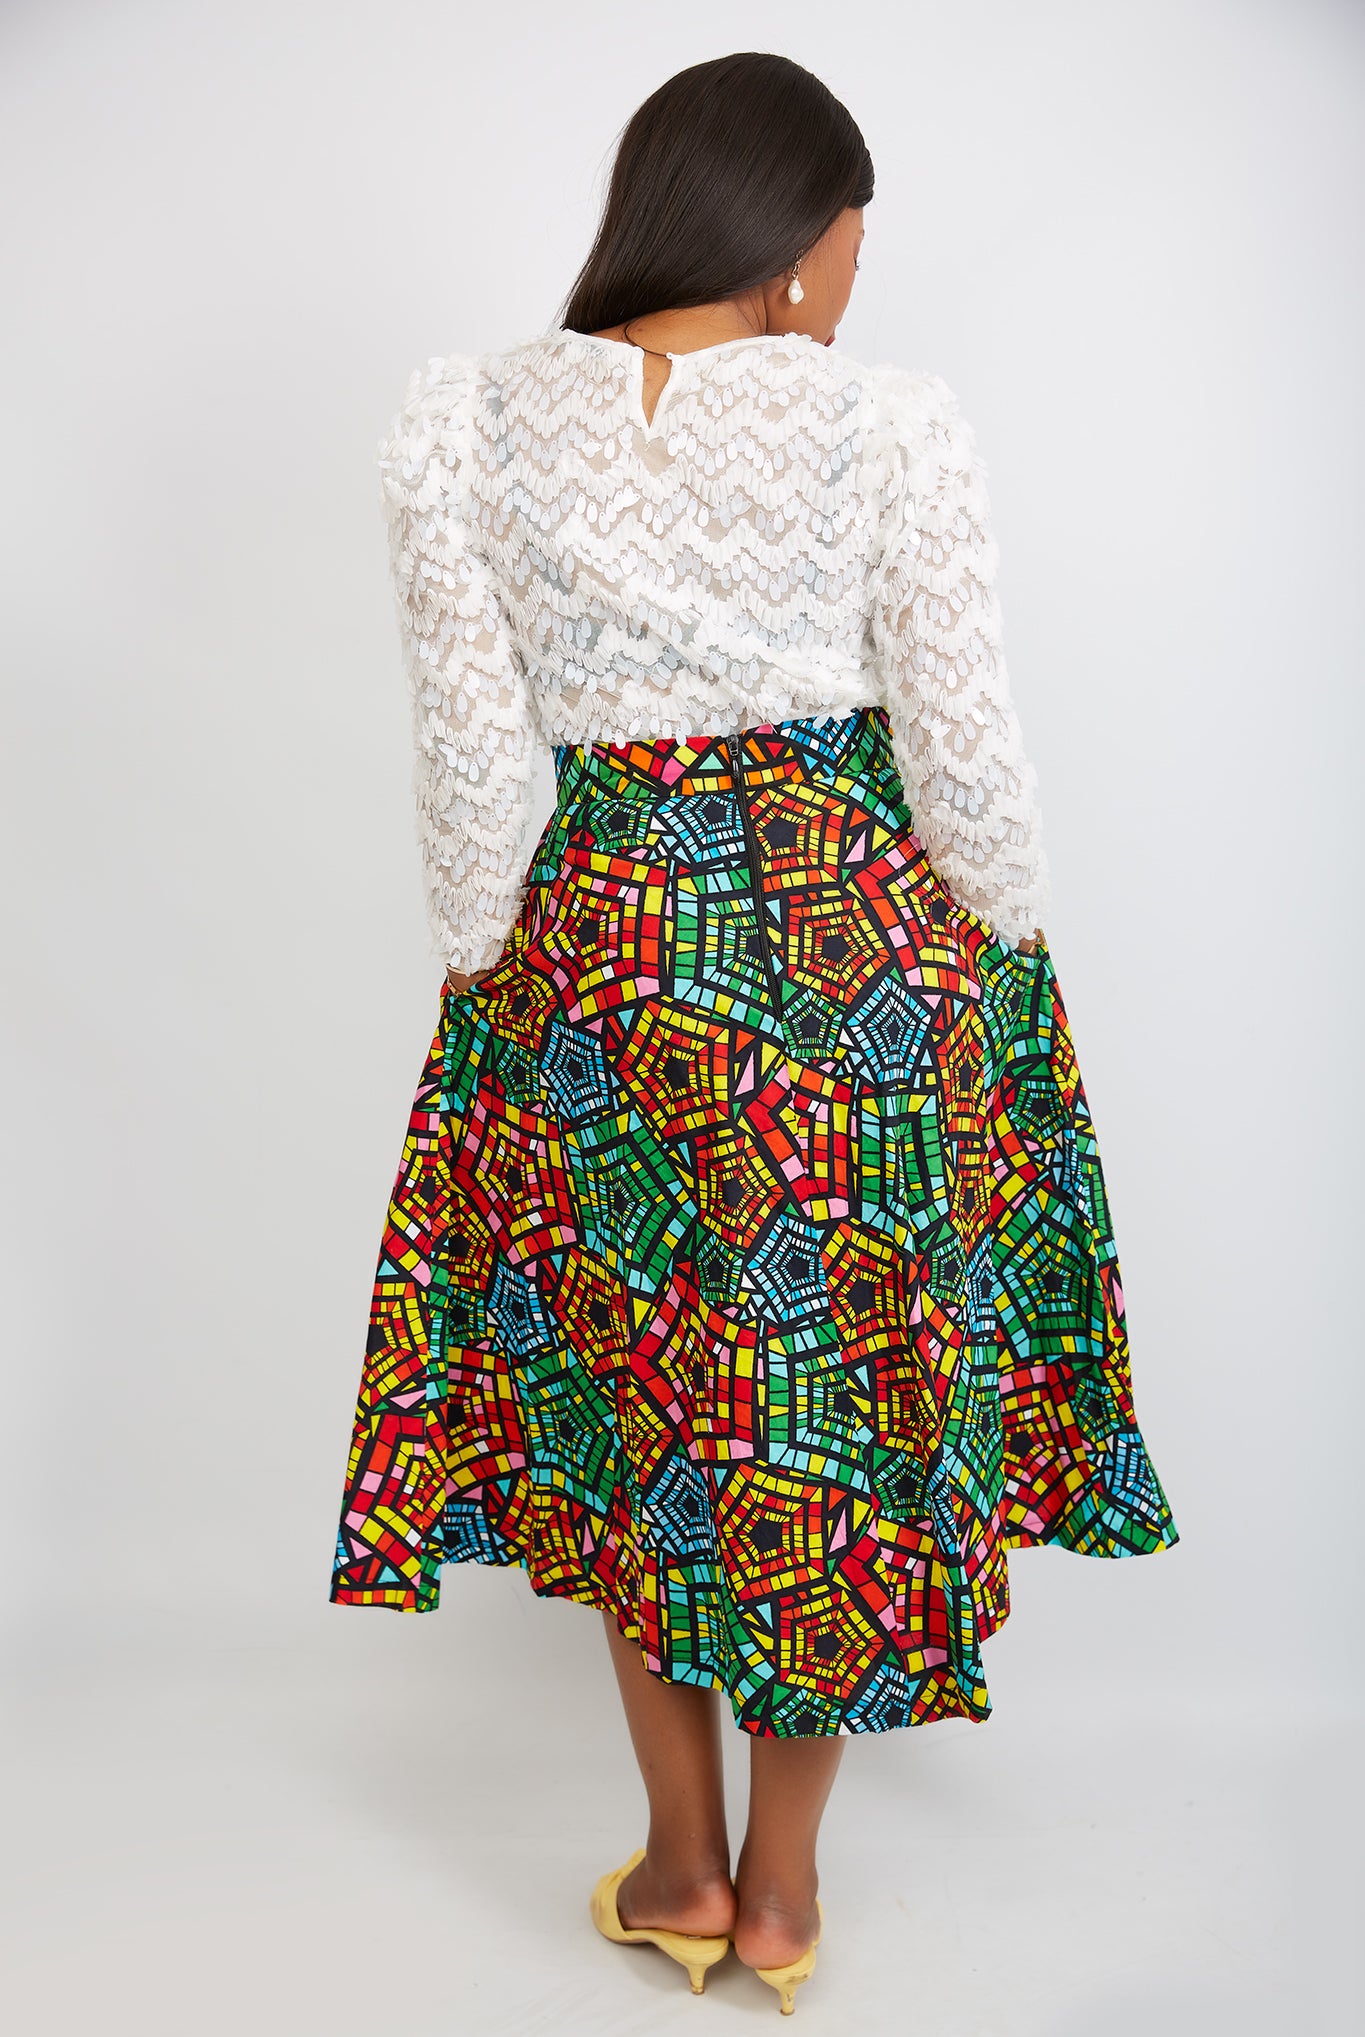 High-waist African skirts | Plus size African Clothing | African print clothing in the UK | Ready to wear African print outfits | African print skirt and top | African clothing | African outfit | kitenge skirts | Africa skirts for Women | Ankara Styles skirts for ladies | African maxi skirt | Danshiki skirt | Ghana African skirt | Kente skirt | African flare skirt | African print skirt | African Clothing Online Shop | Short African skirt | African mini skirt